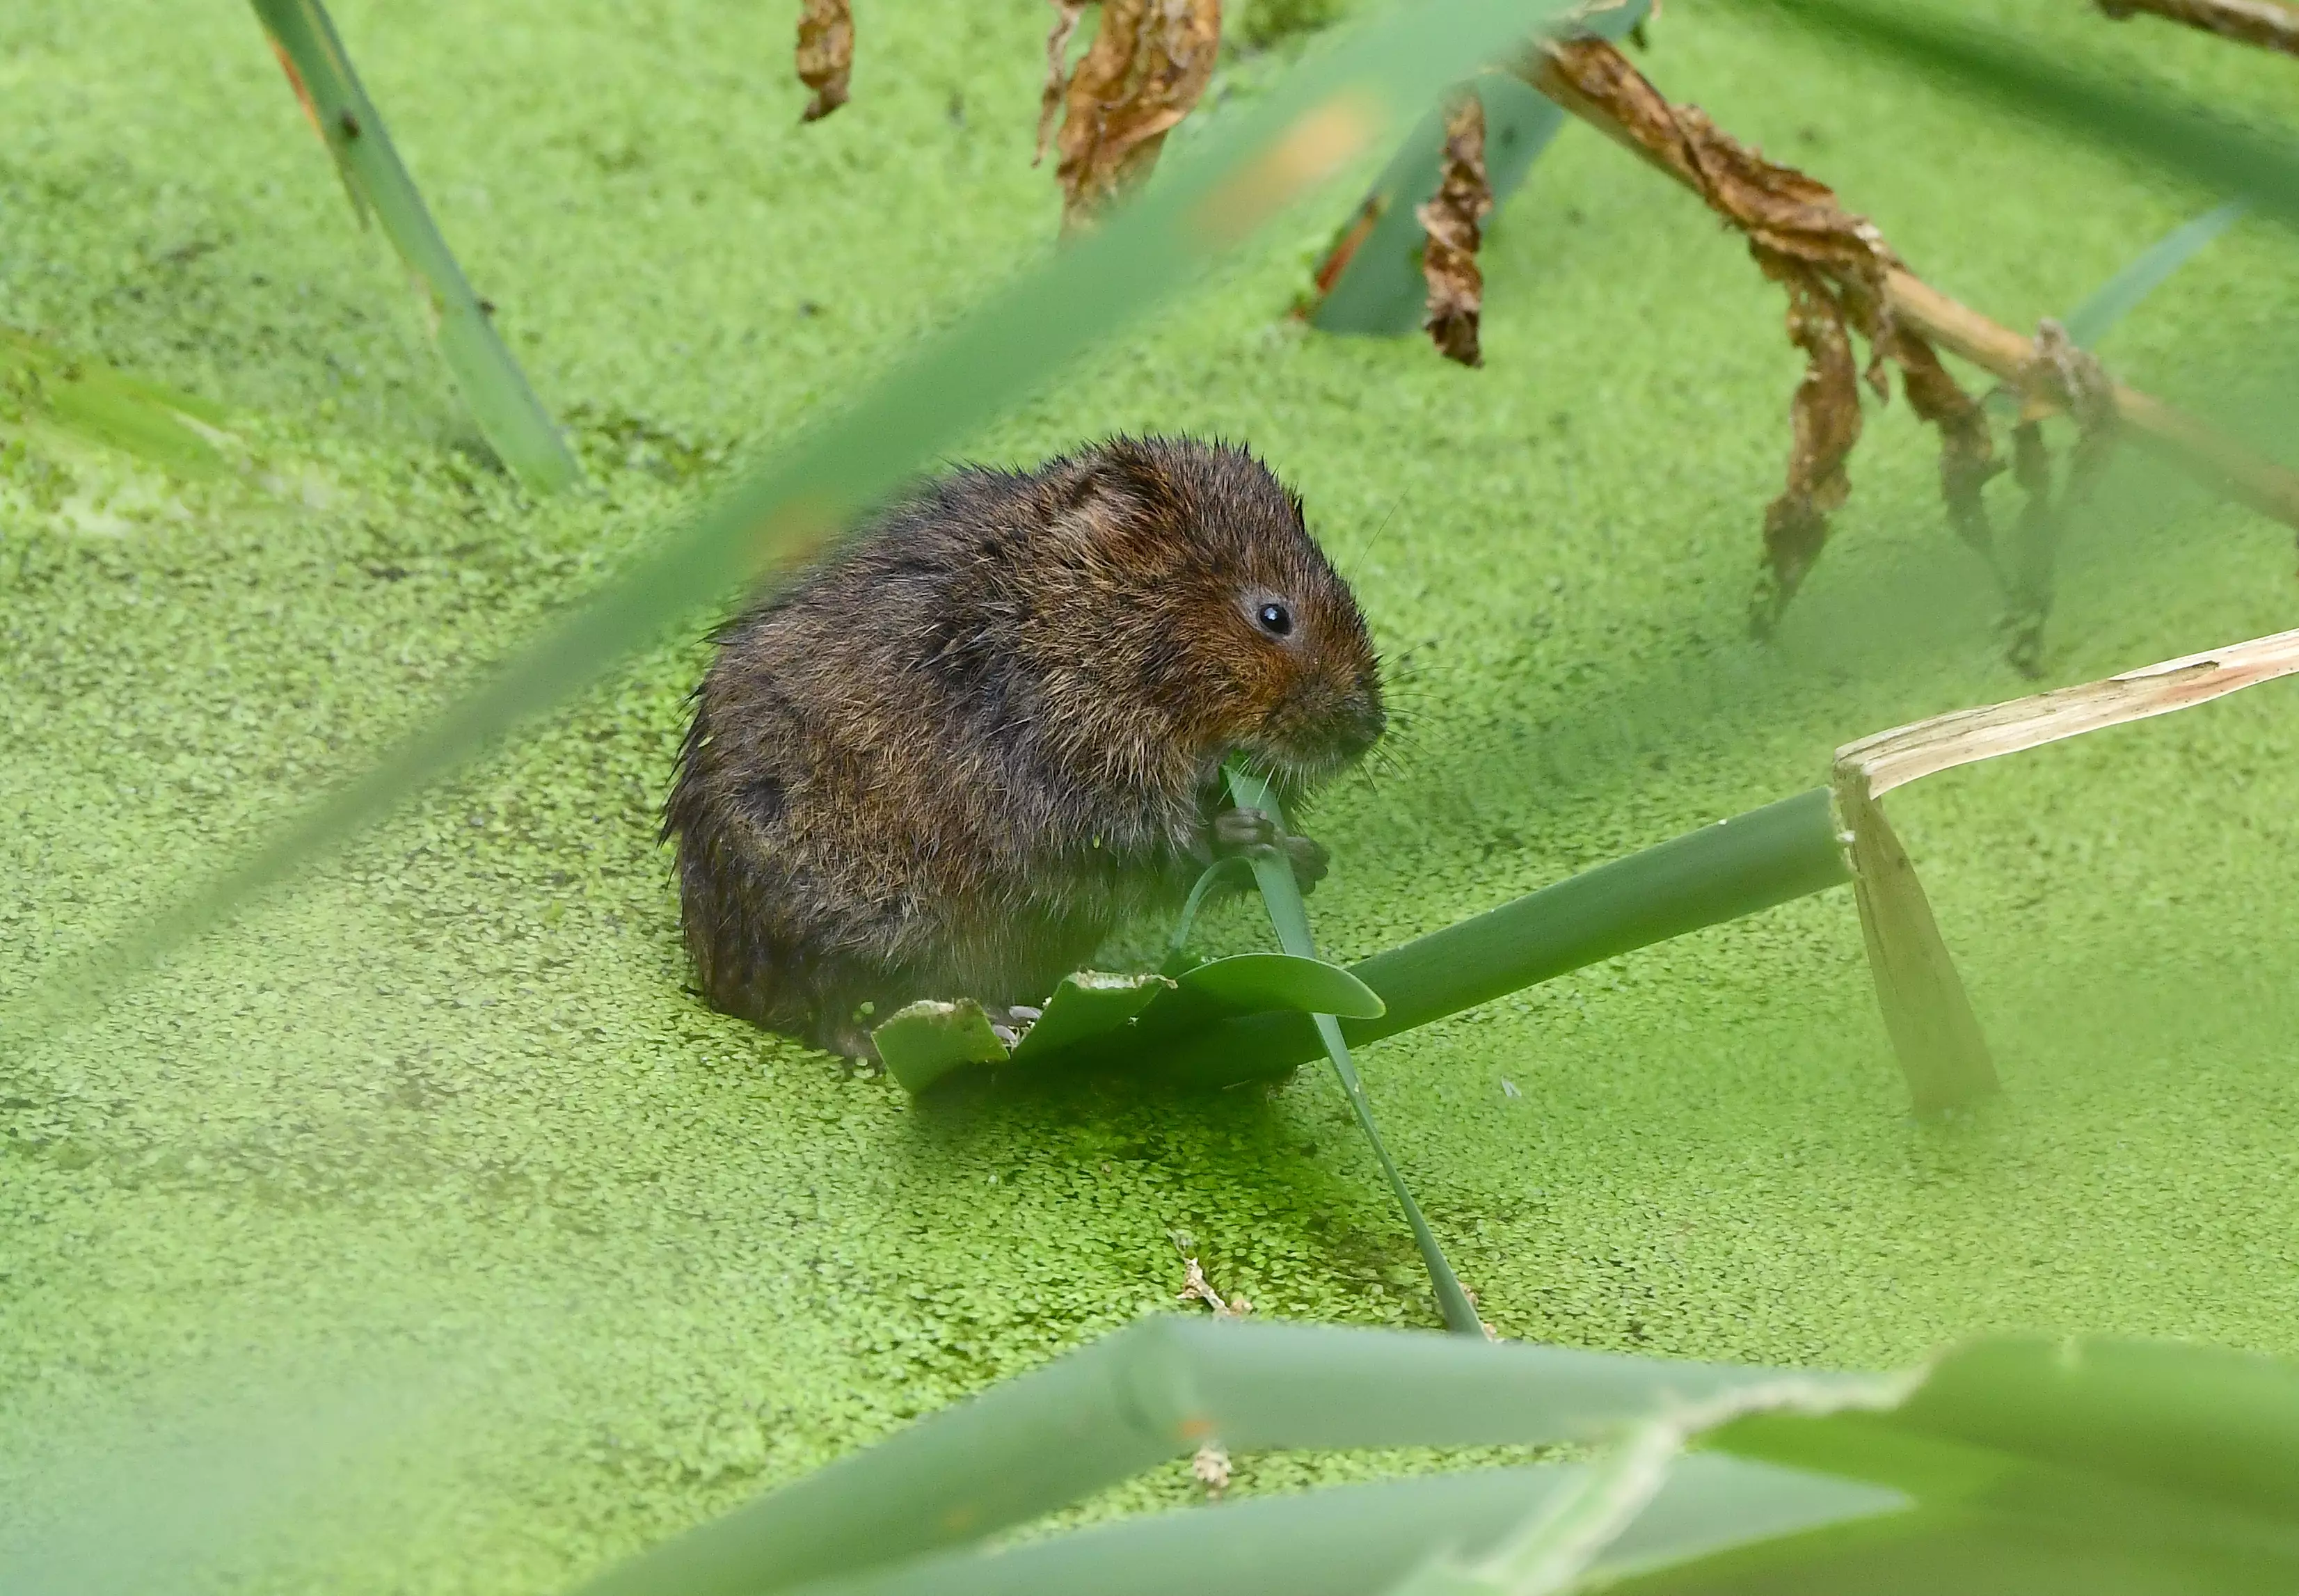 'Rapid change' is needed to save the likes of the water vole.